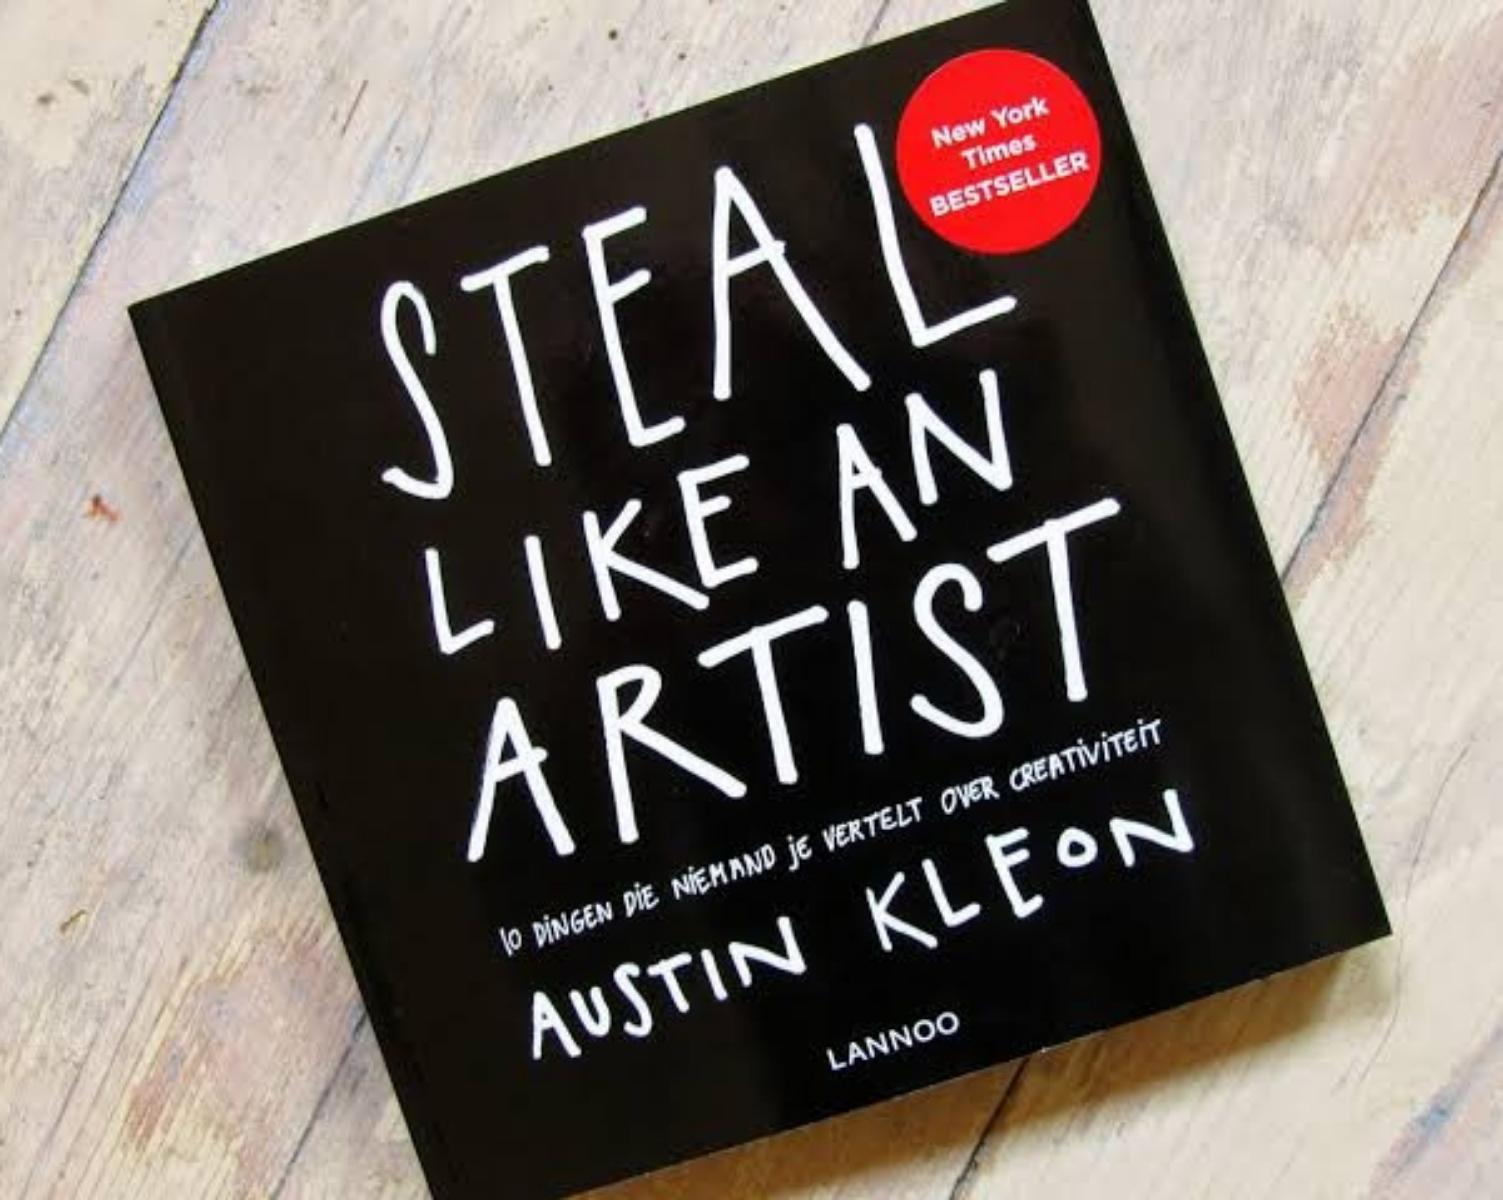 5 Lessons I Learned from "Steal Like An Artist